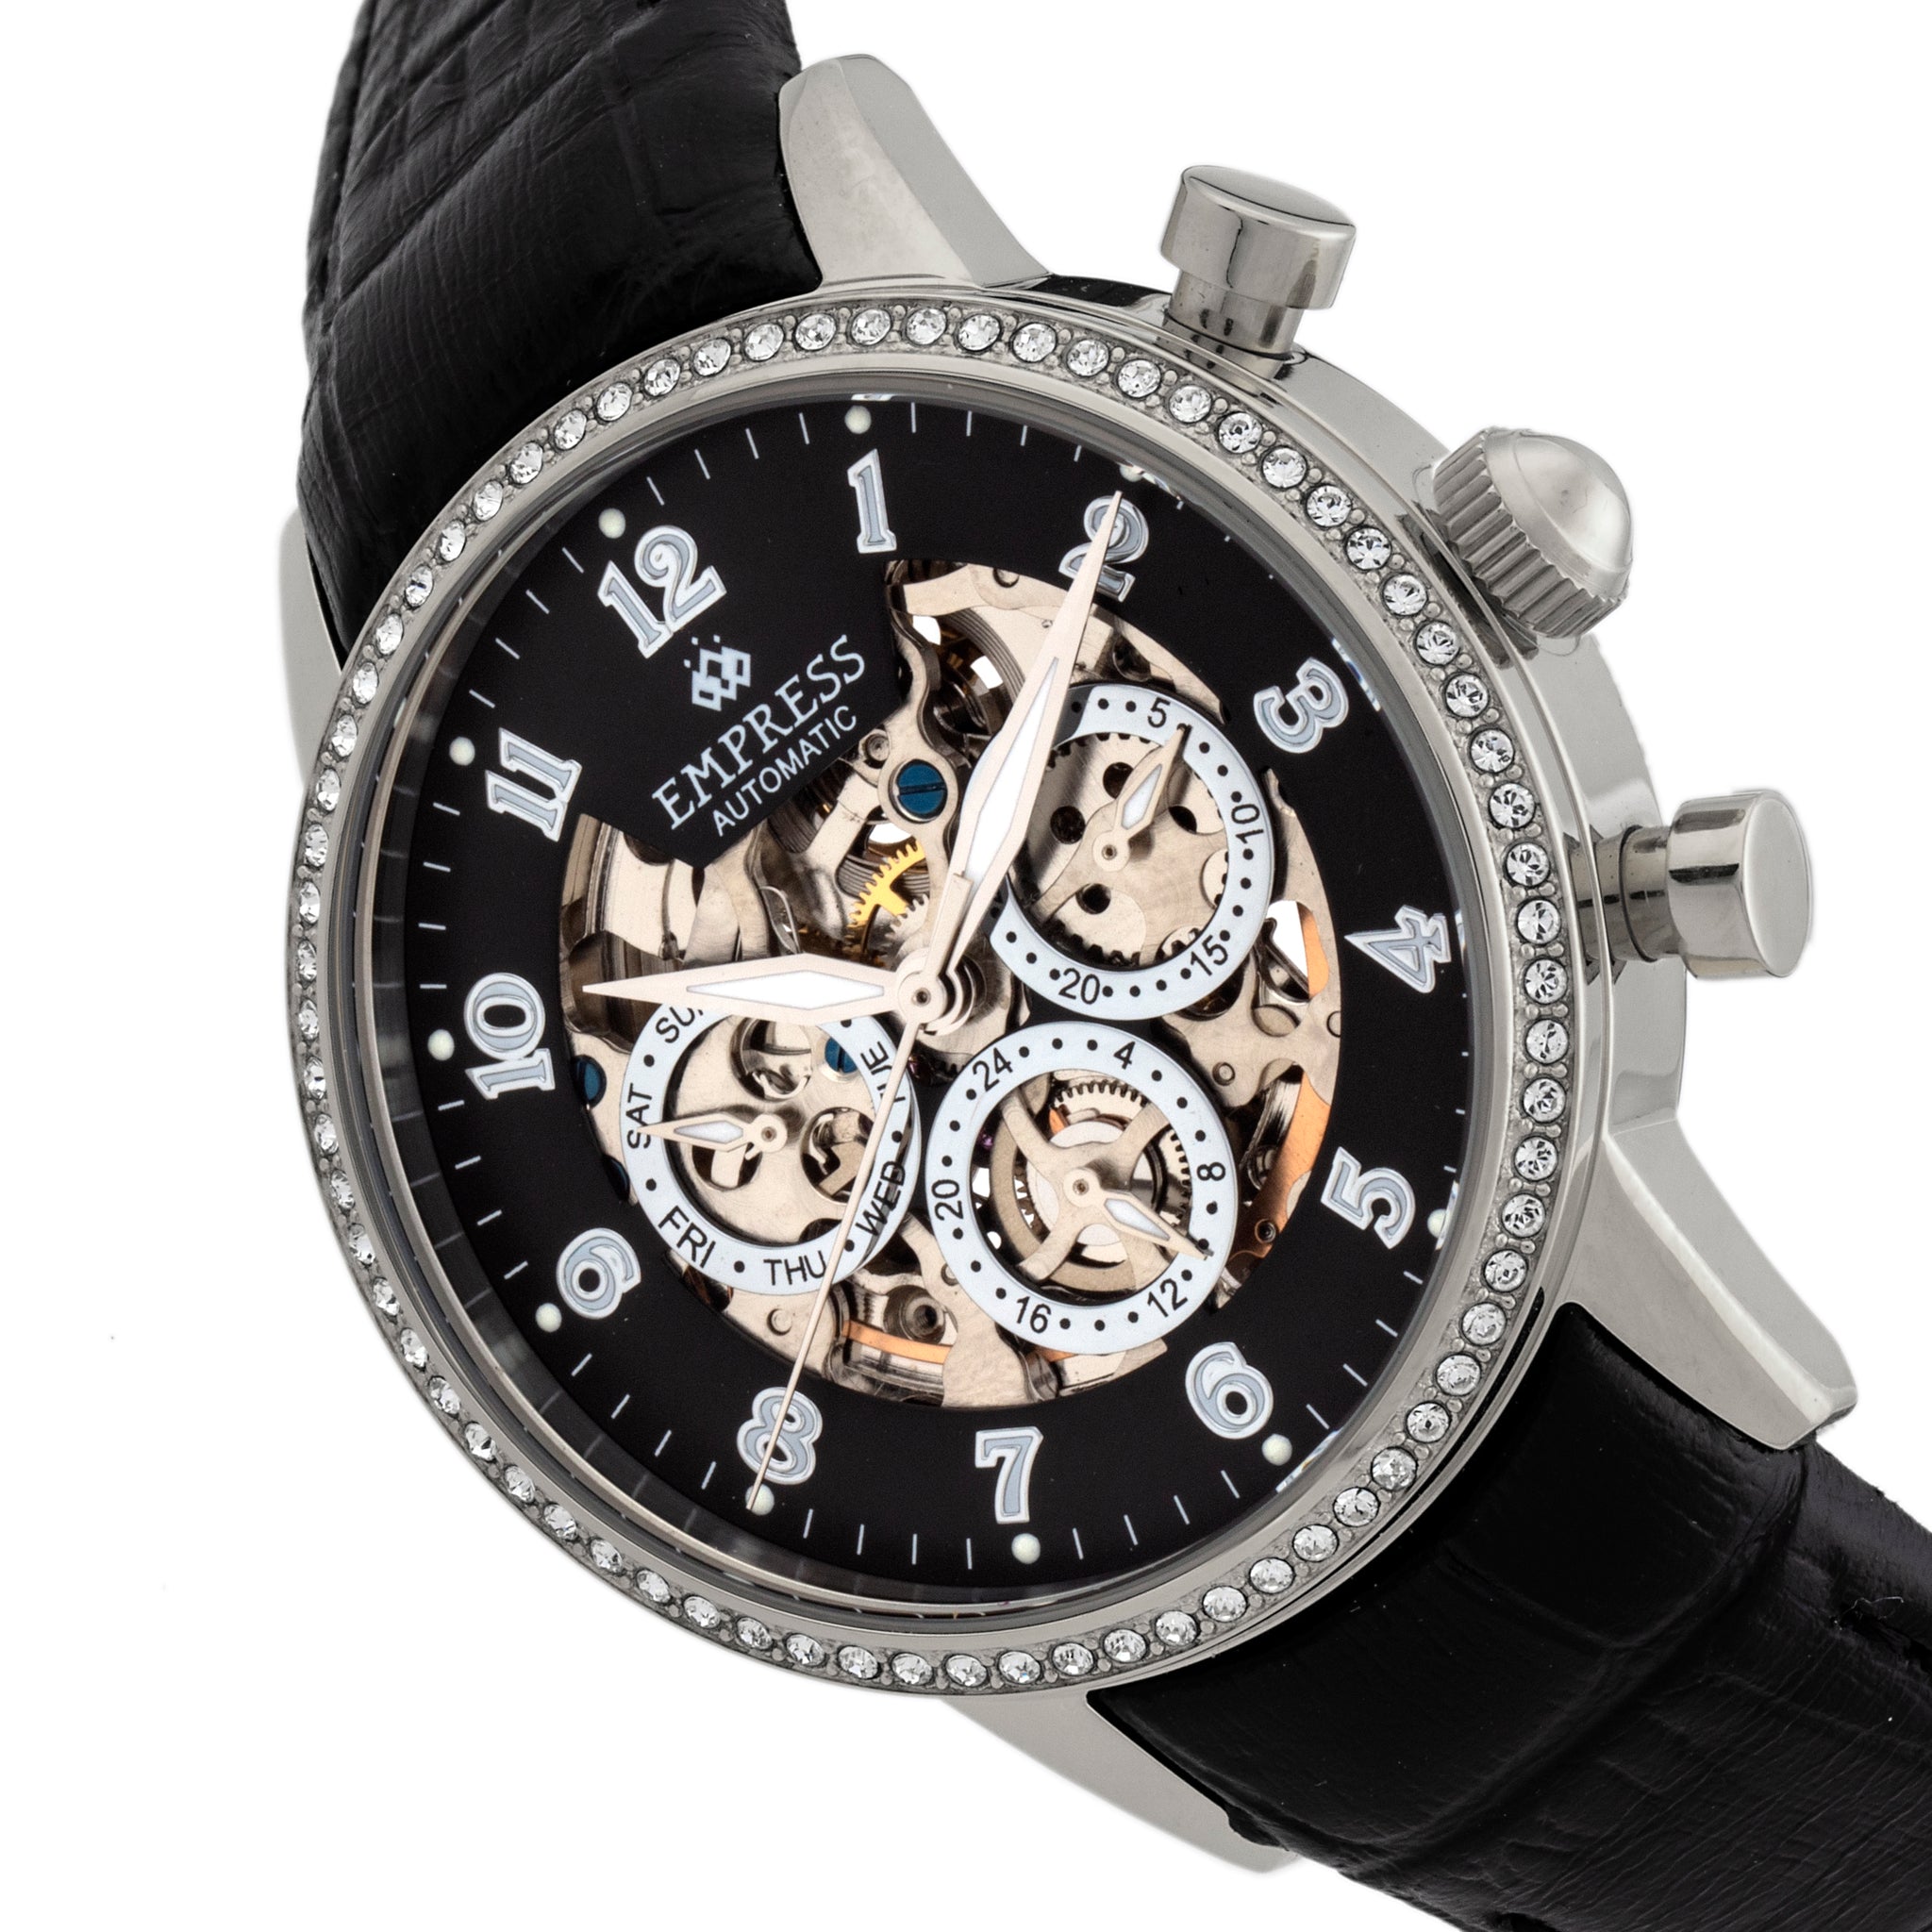 Empress Beatrice Automatic Skeleton Dial Leather-Band Watch w/Day/Date - Silver/Black - EMPEM2002